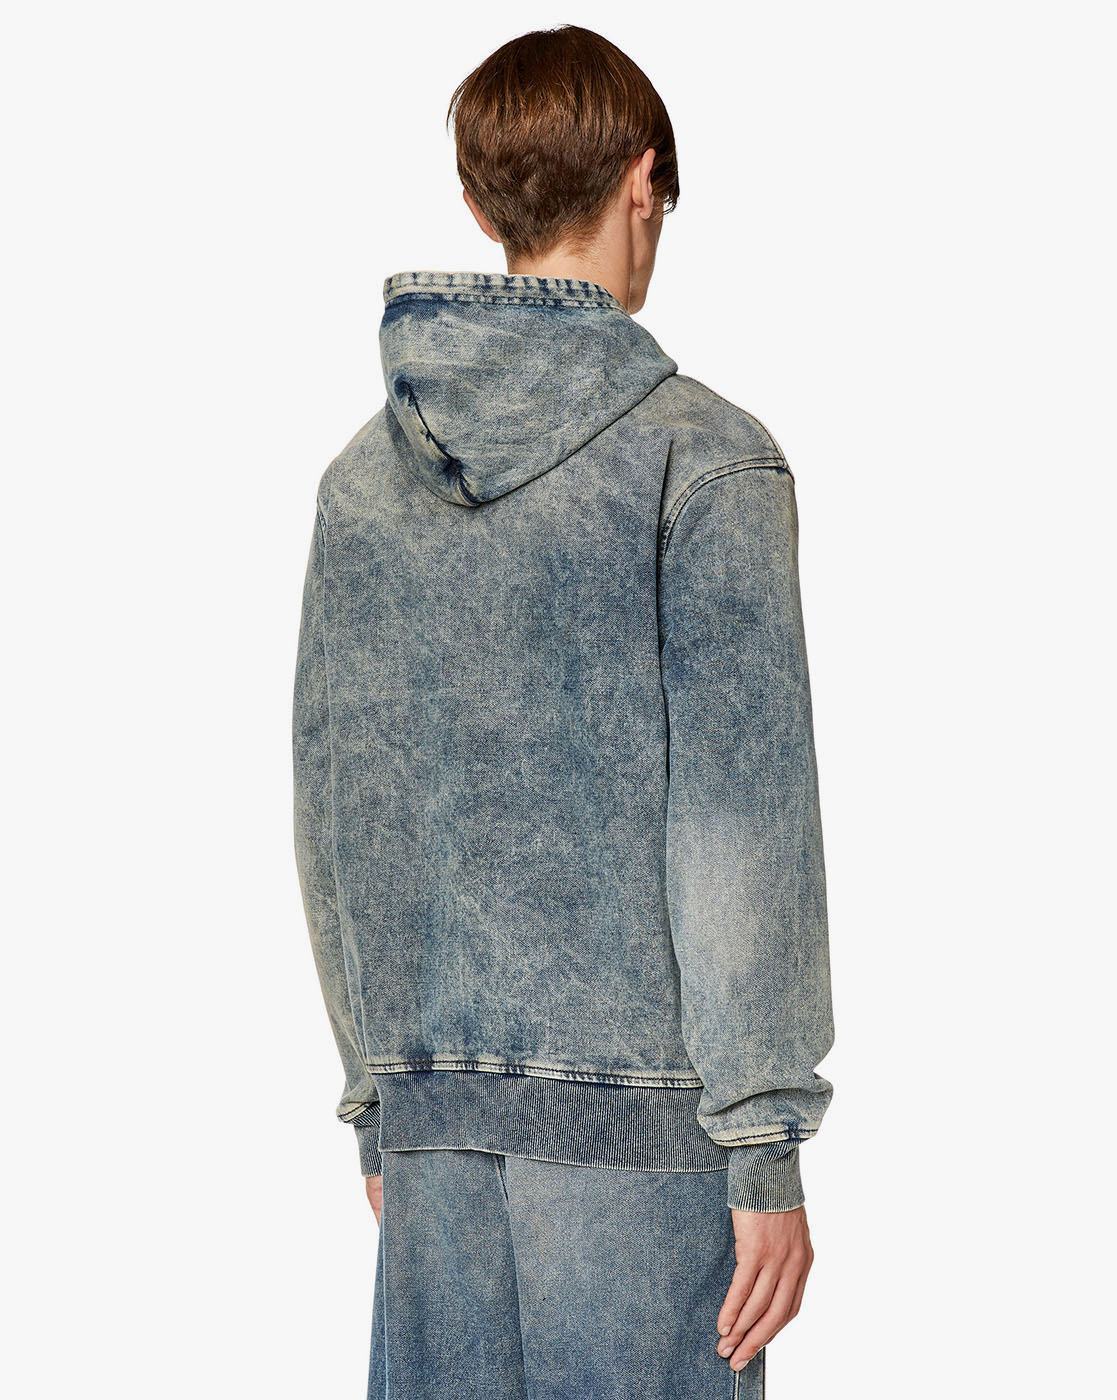 fcity.in - Inspire The Next Light Blue Washed Denim Hoodie Jacket / Fancy